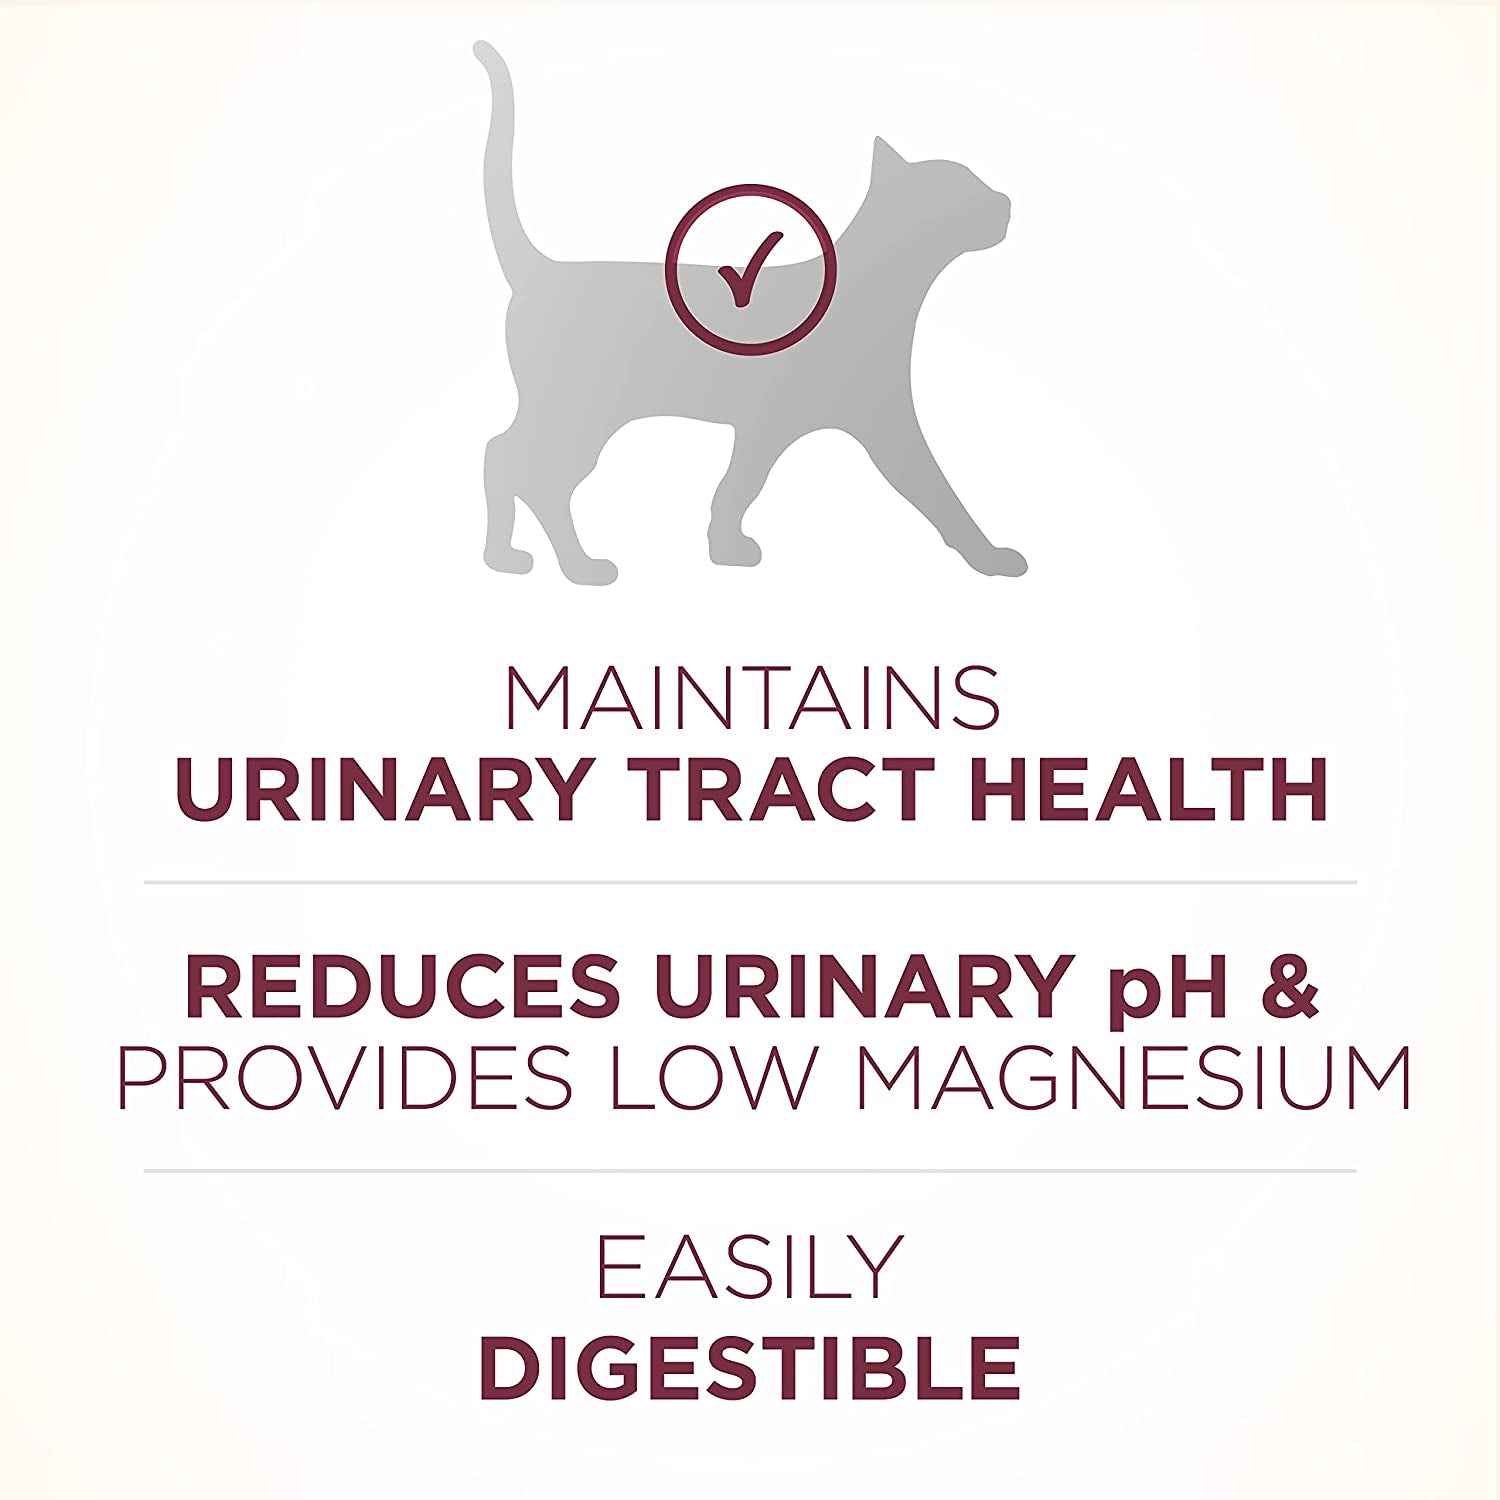 Purina ONE High Protein Dry Cat Food, +Plus Urinary Tract Health Formula - 22 Lb. Bag